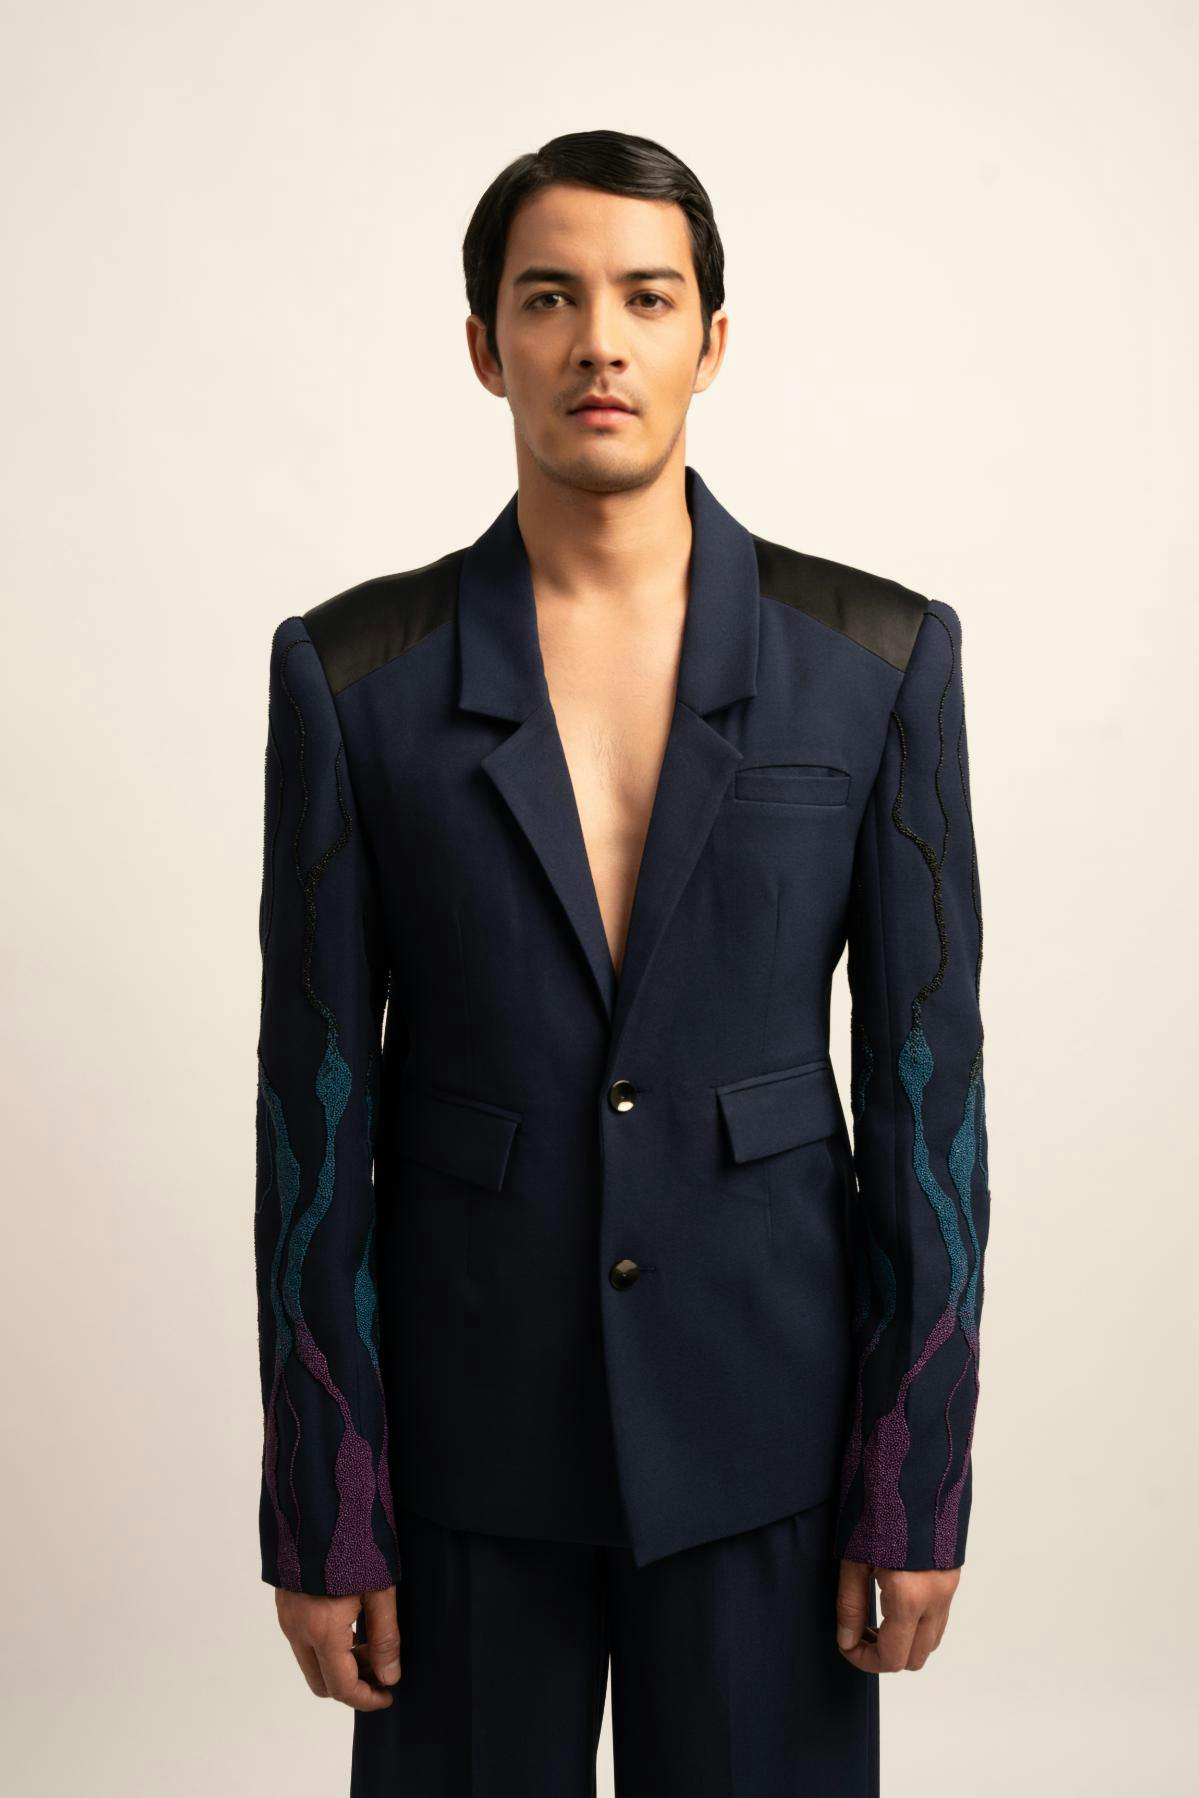 The Aetherial Blazer, a product by Siddhant Agrawal Label